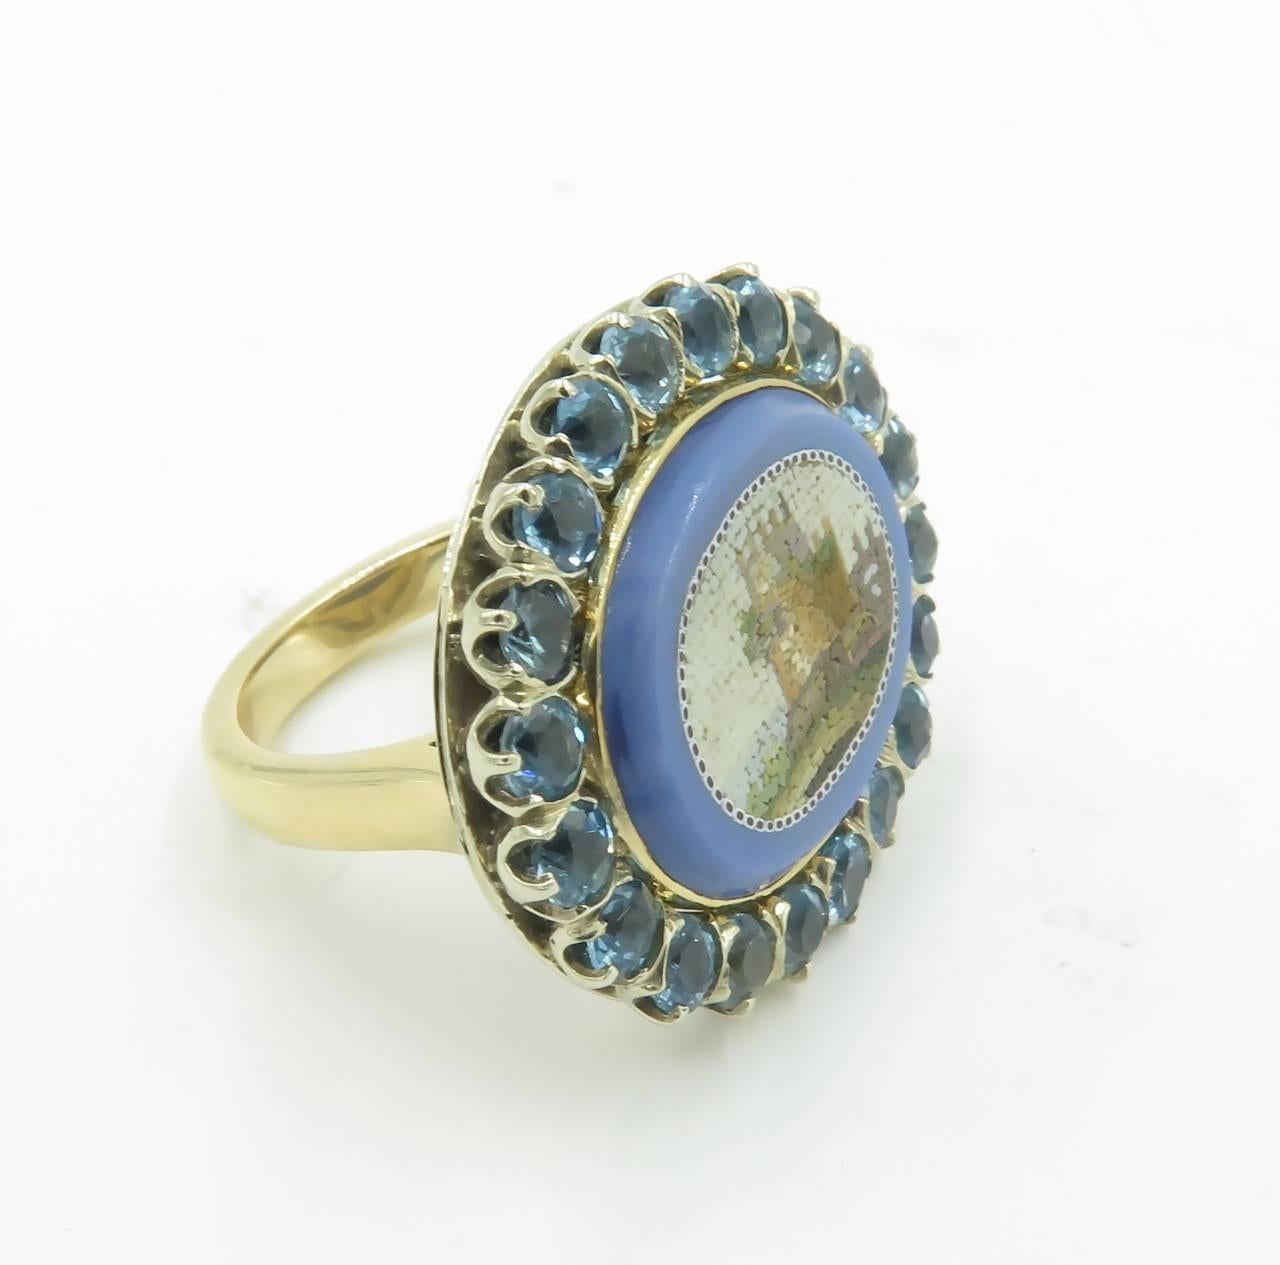 An antique Vatican School micromosaic depicting the Torre Normana, 19th Century, in a contemporary 14 karat white and yellow gold ring mount designed by Marcella Ciceri.  The micromosaic is set in the original oval medium blue glass surround, within